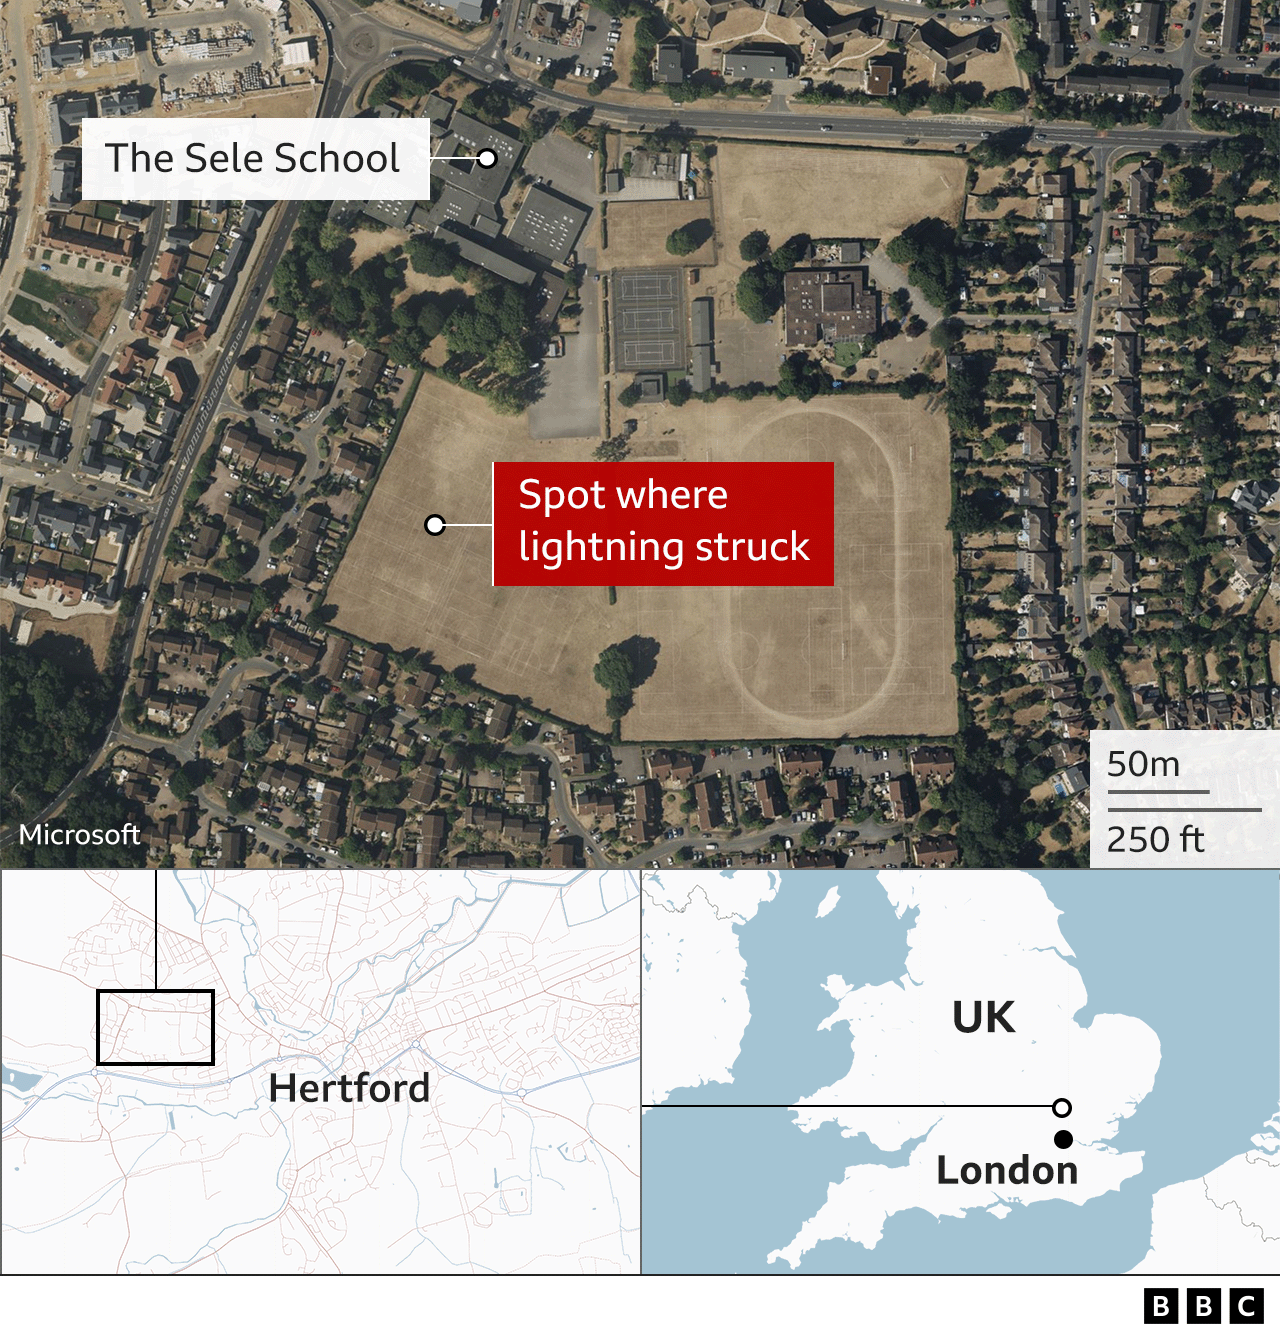 Map showing The Sele School and where the lightning struck on the playing field